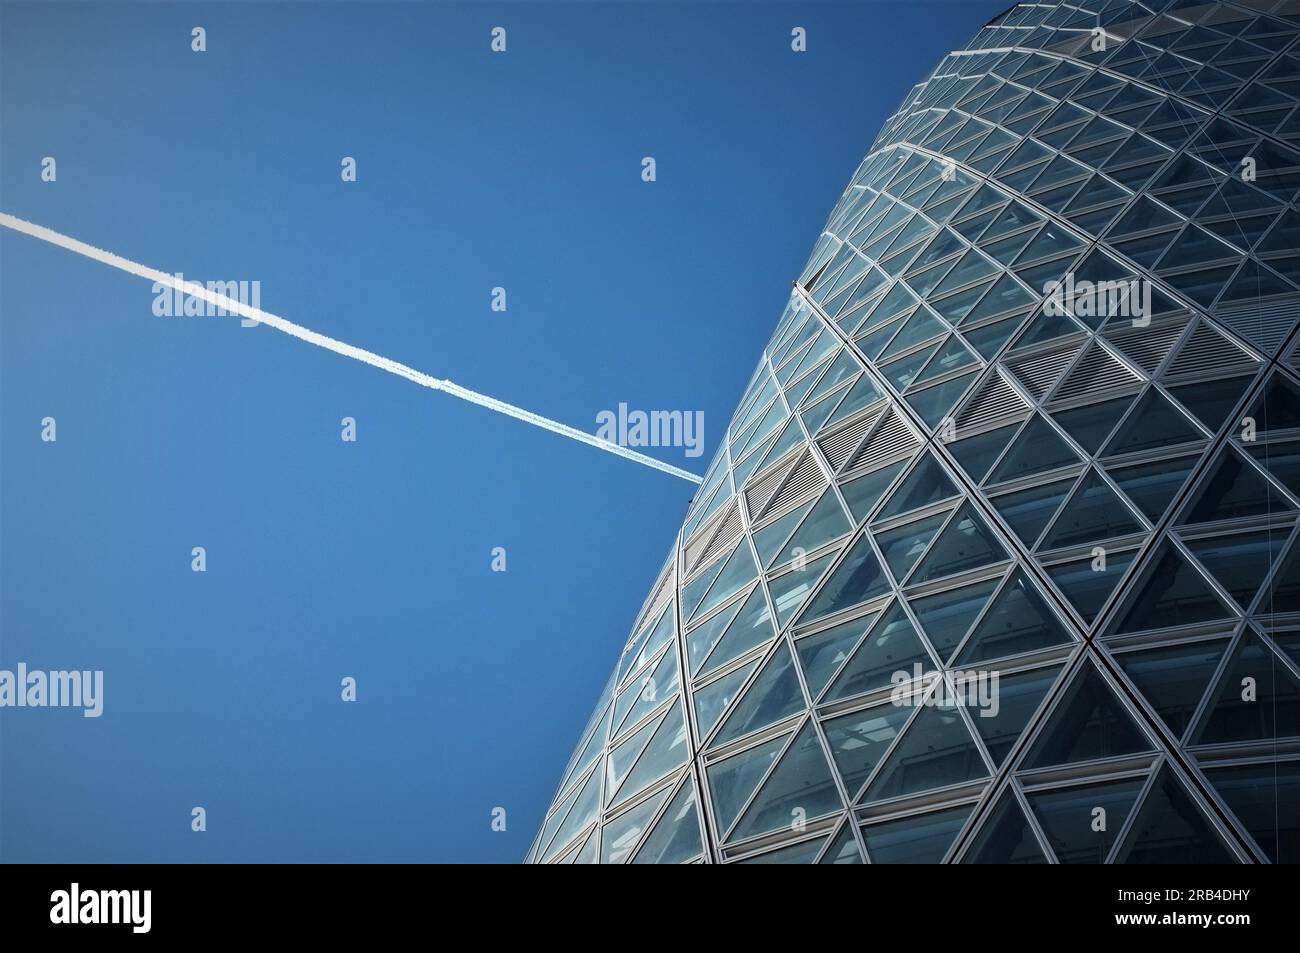 A chemtrail over a modern office building in Milan, Italy. Stock Photo